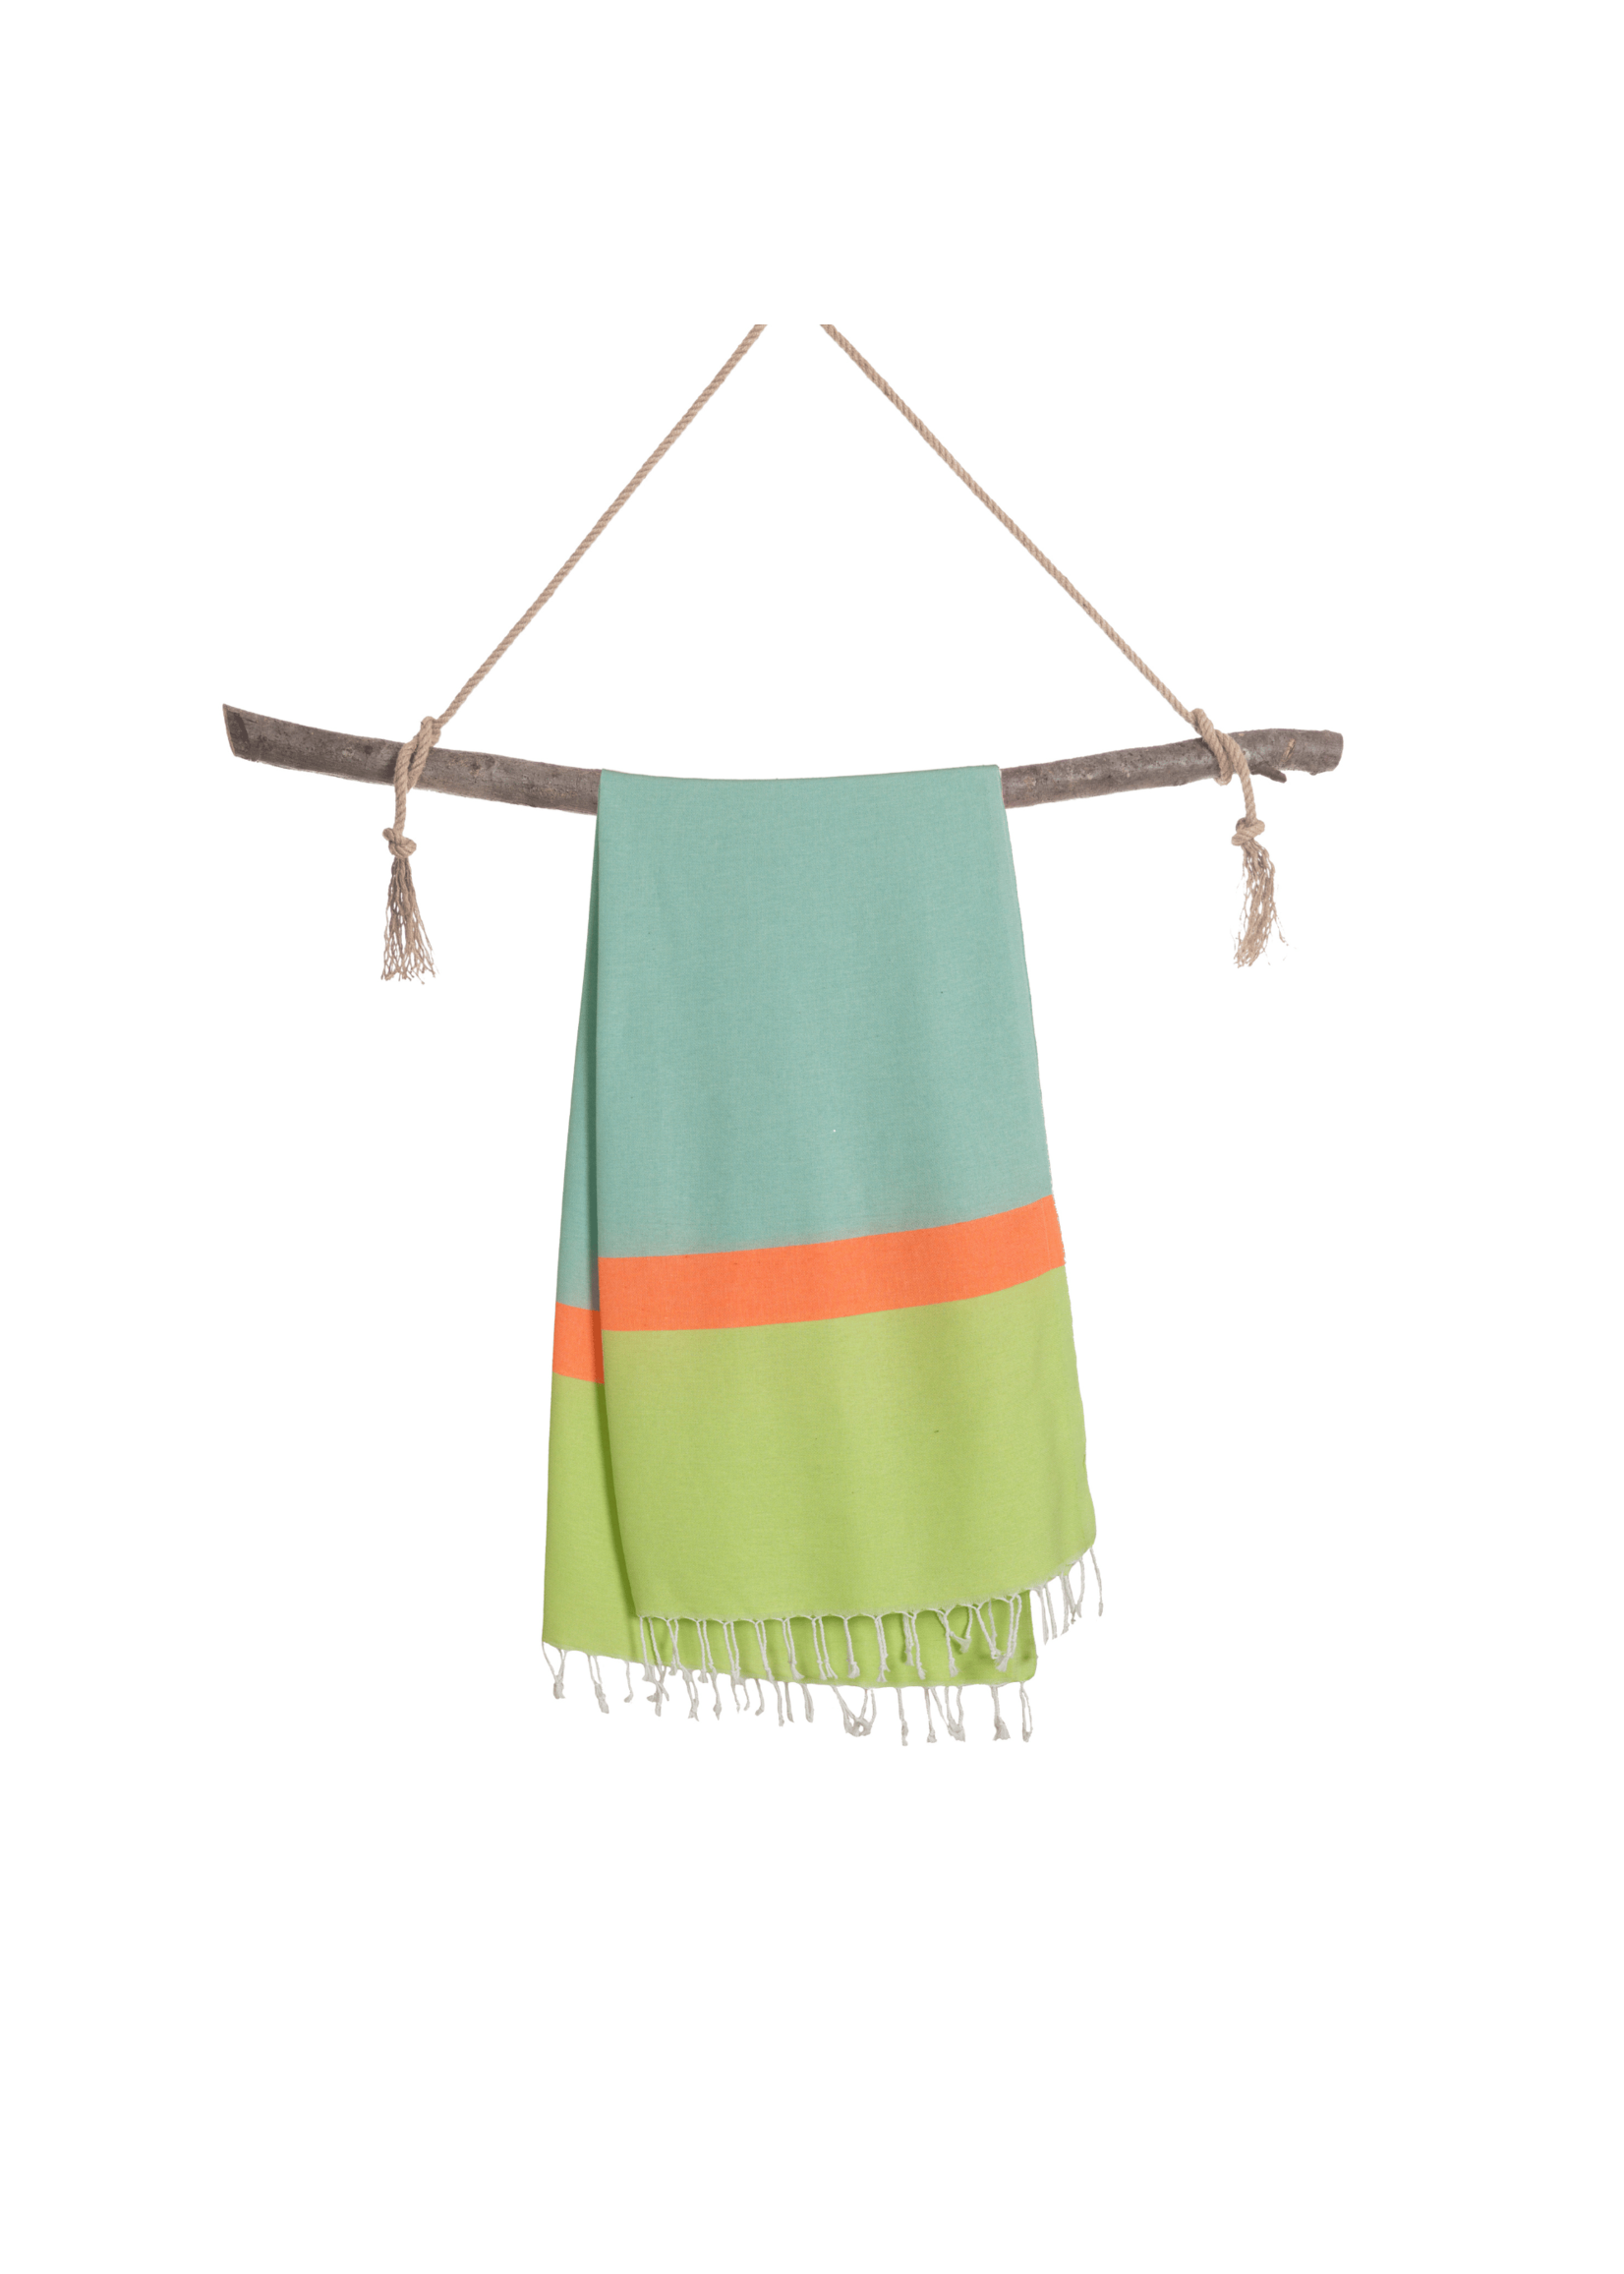 Towel to Go NEON Beach & Pool Towel | Turkish Hammam Towel | Recycled Cotton | Green - Blue, with Recycled Gift Box